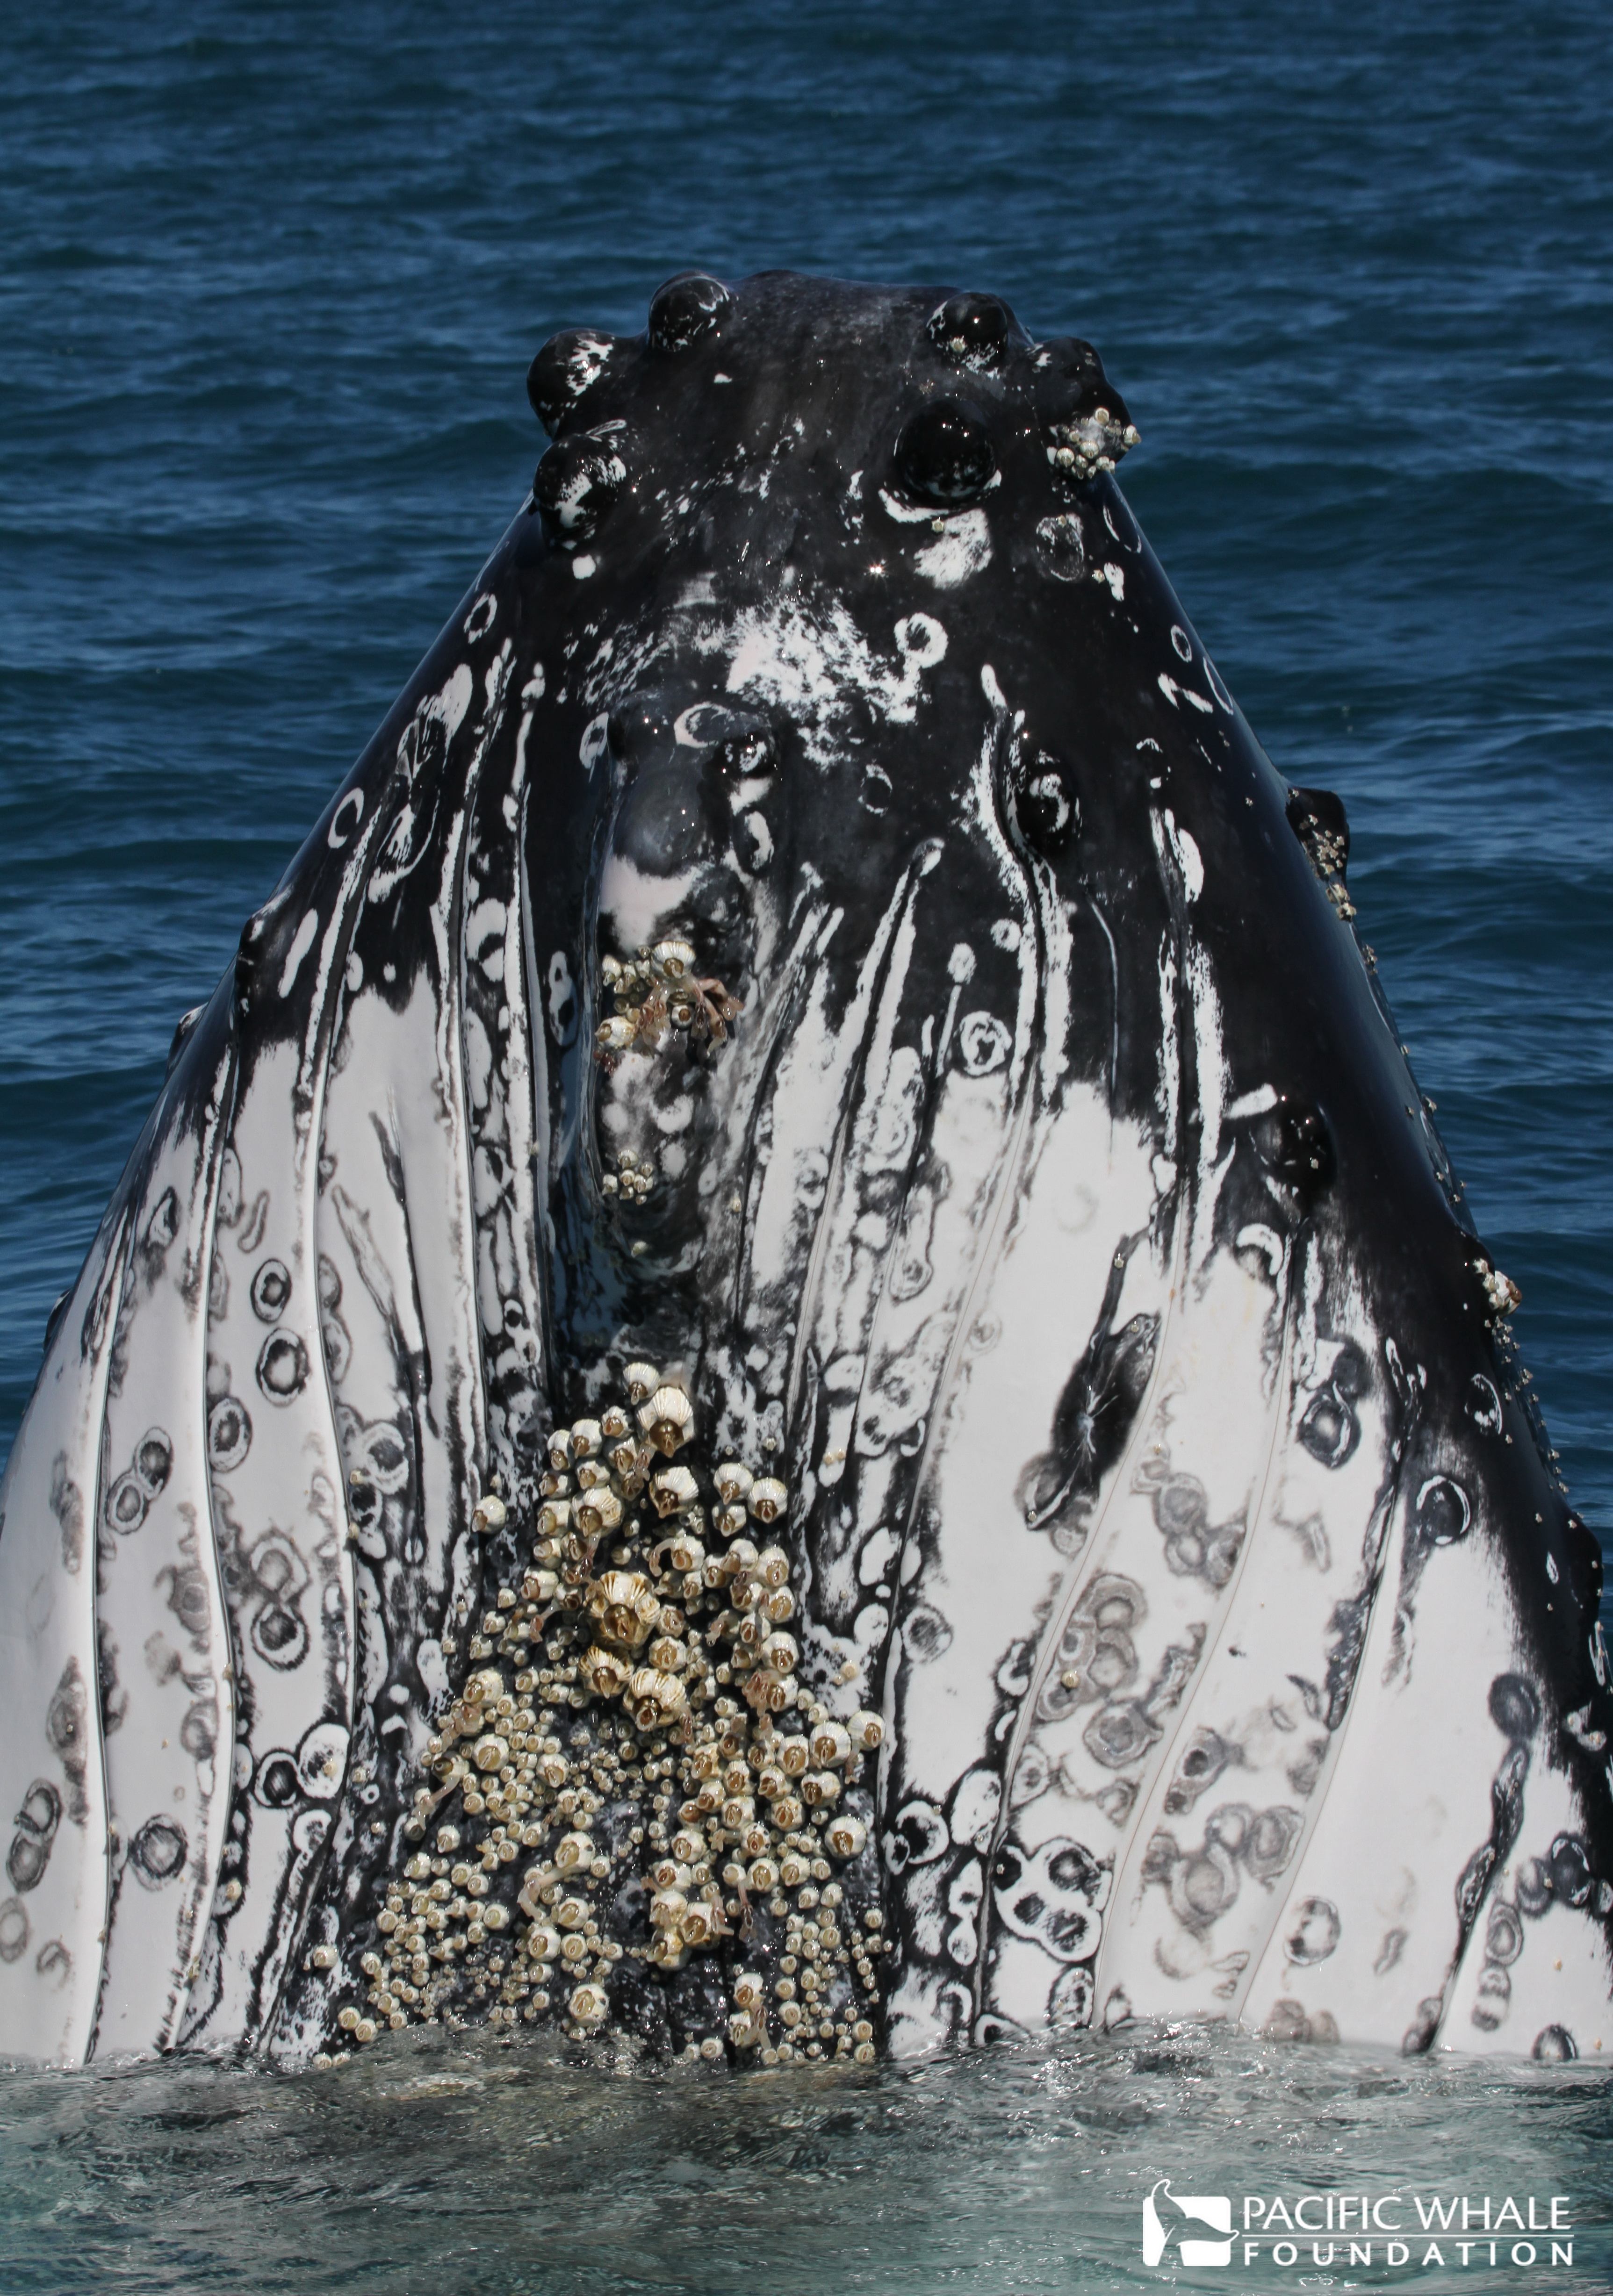 Barnacle blog | Pacific Whale Foundation